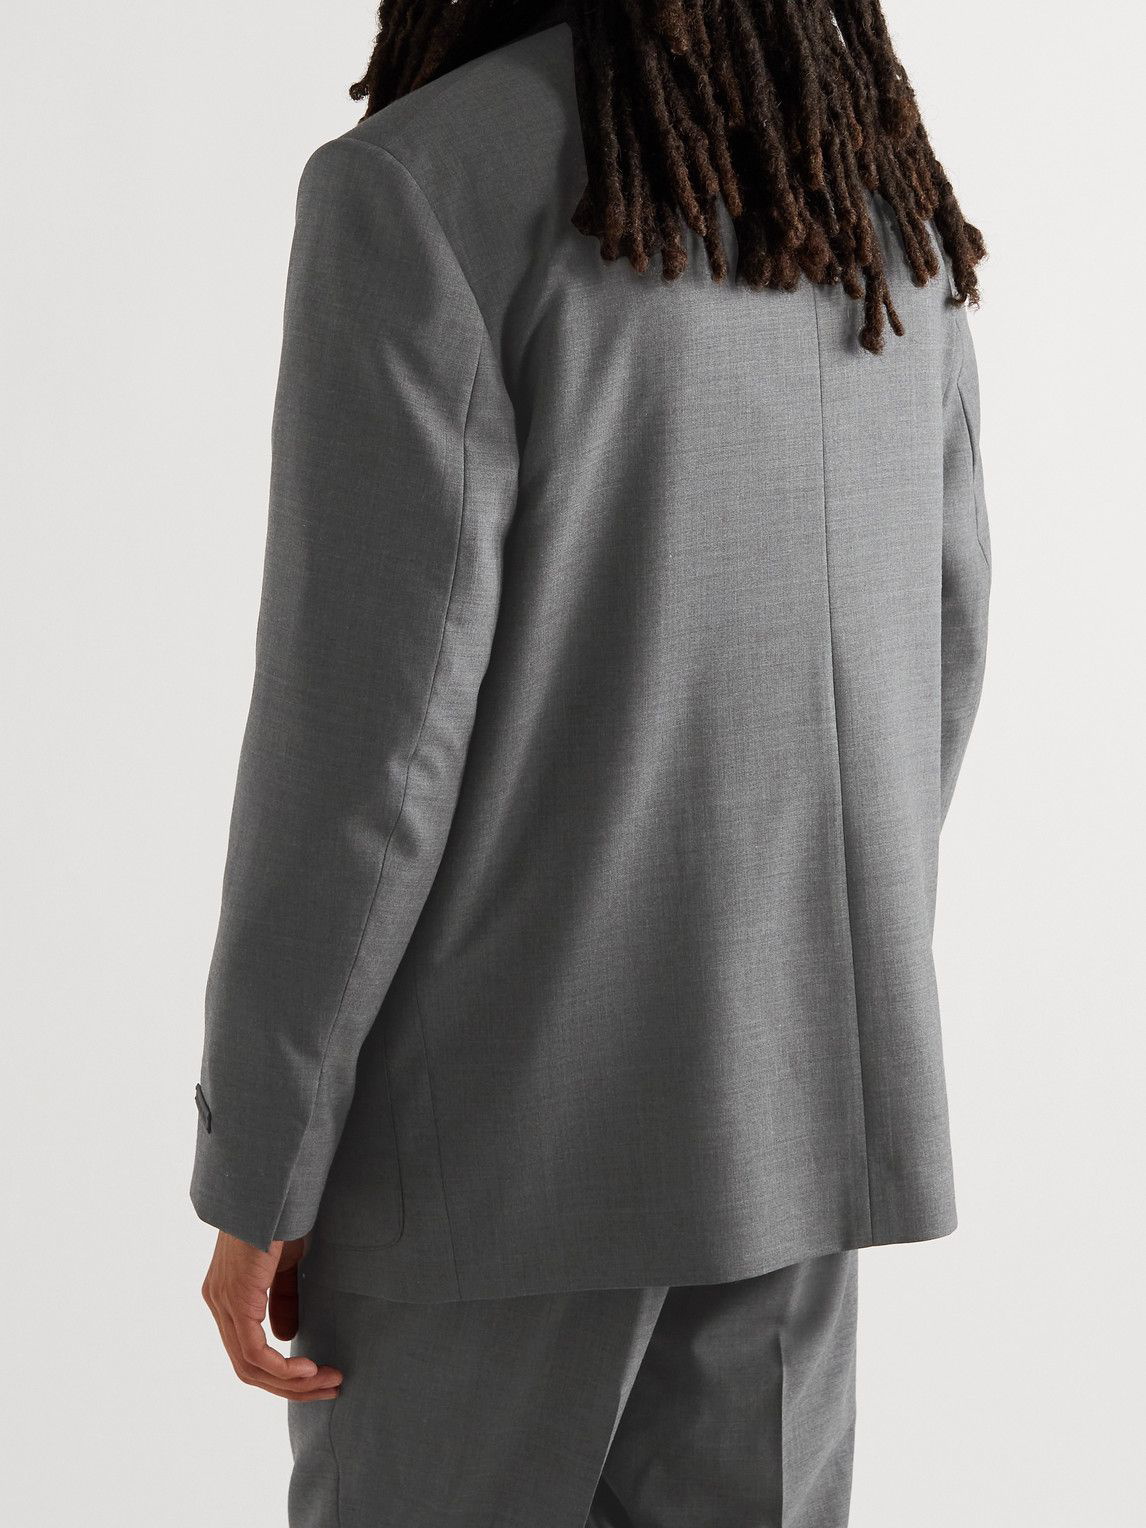 Women's Double-Breasted Pant Suit, 100% Wool Super 120s